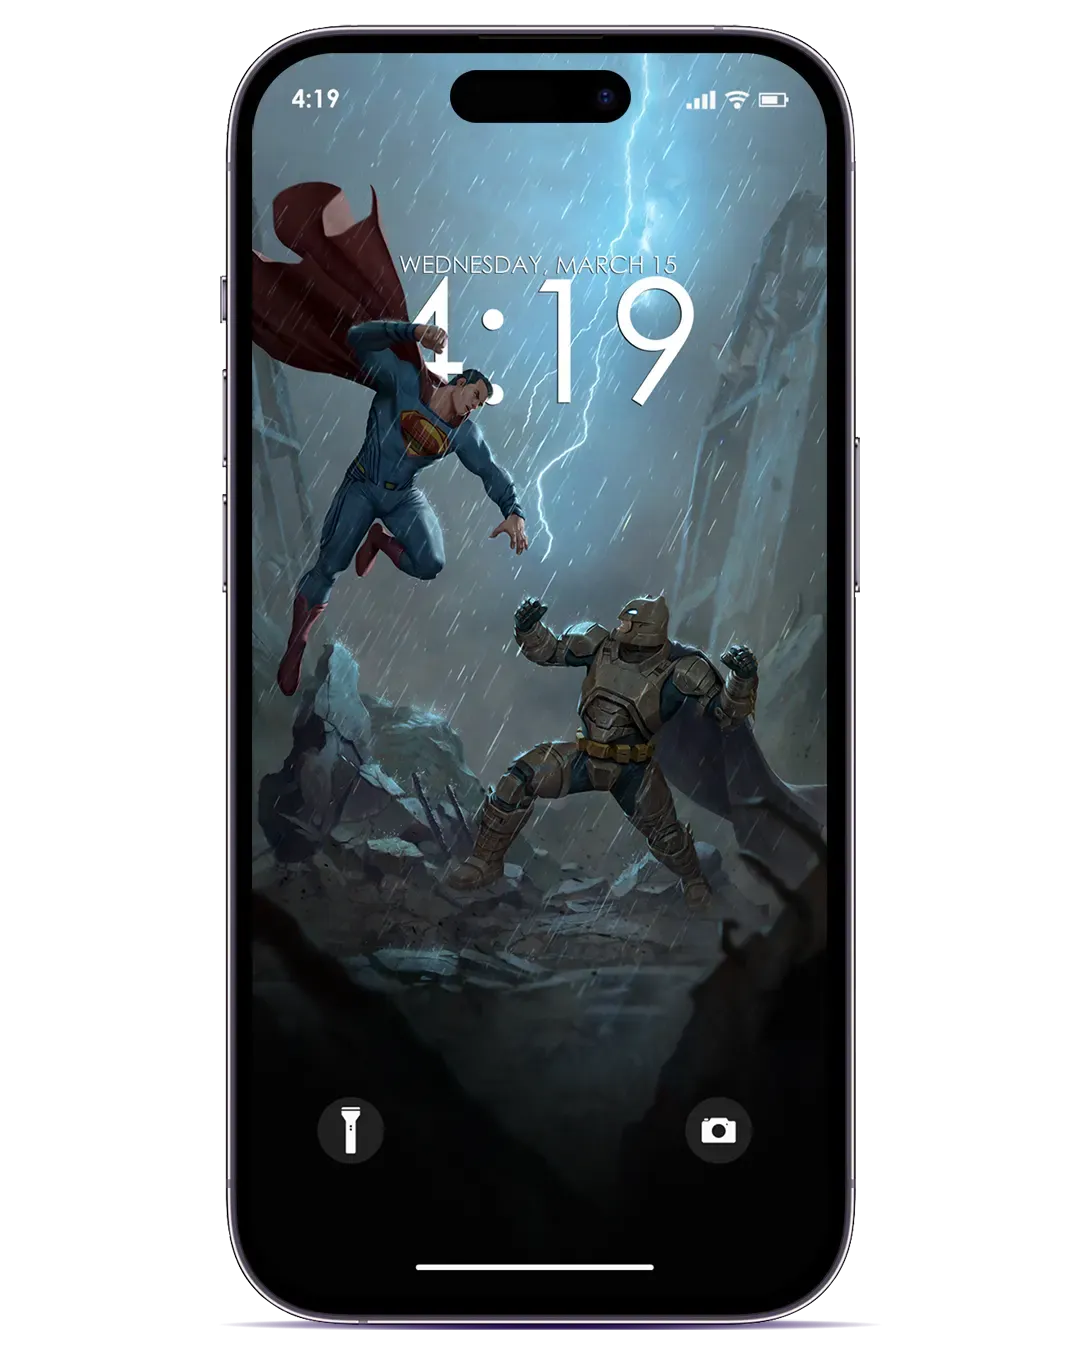 BATMAN FIGHTING SUPERMAN WALLPAPER FOR IOS 16 AND ANDROID